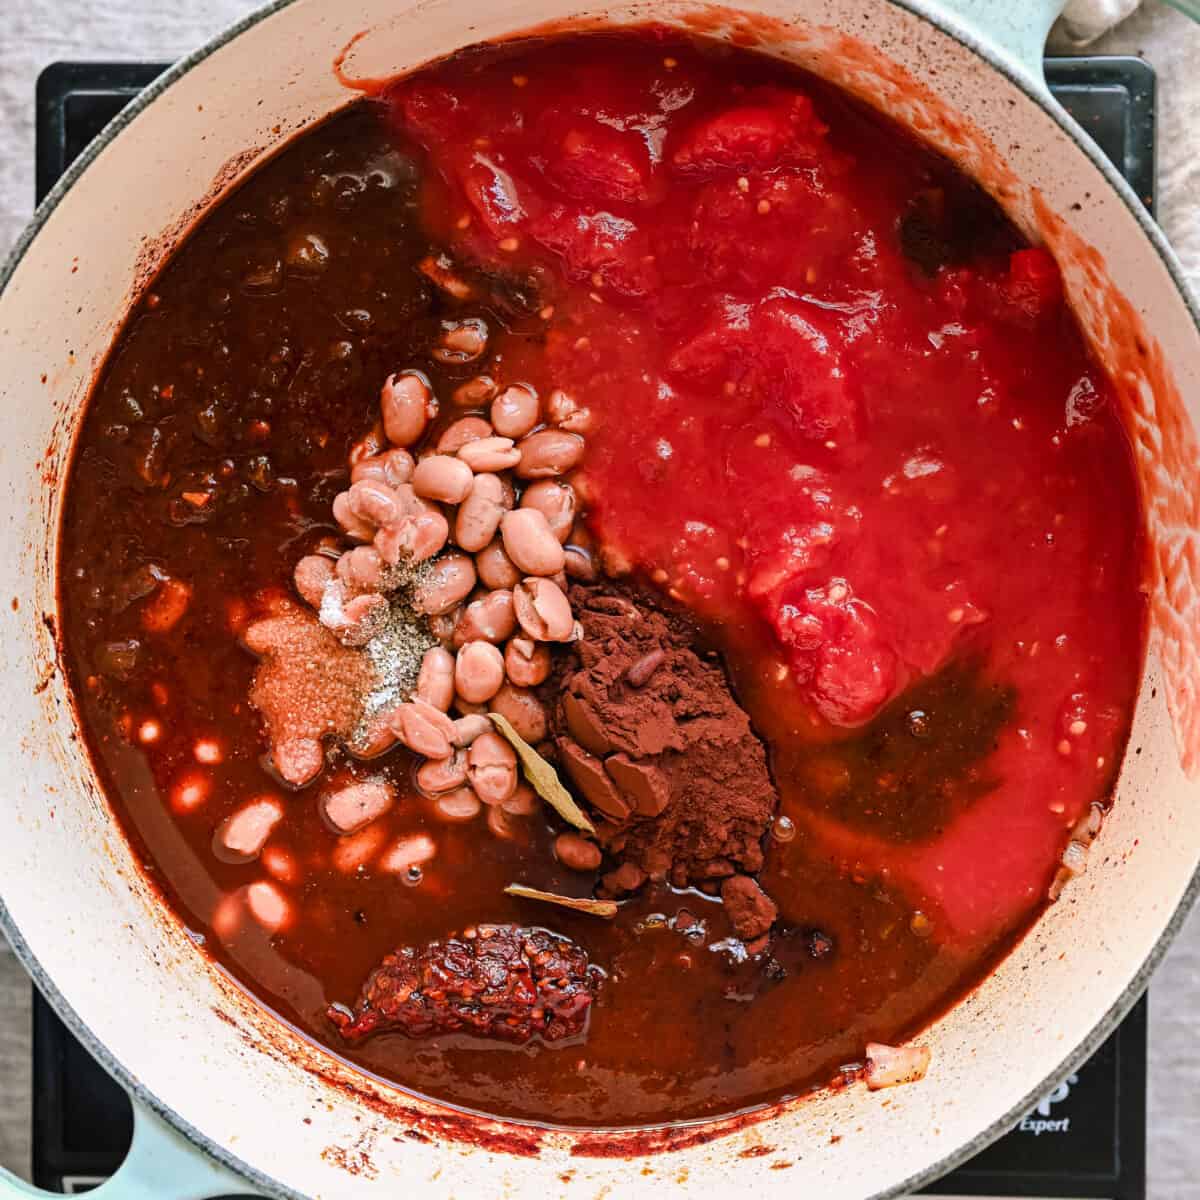 tomatoes, pinto beans, cocoa powder, chipotle peppers and bay leaves added to chili